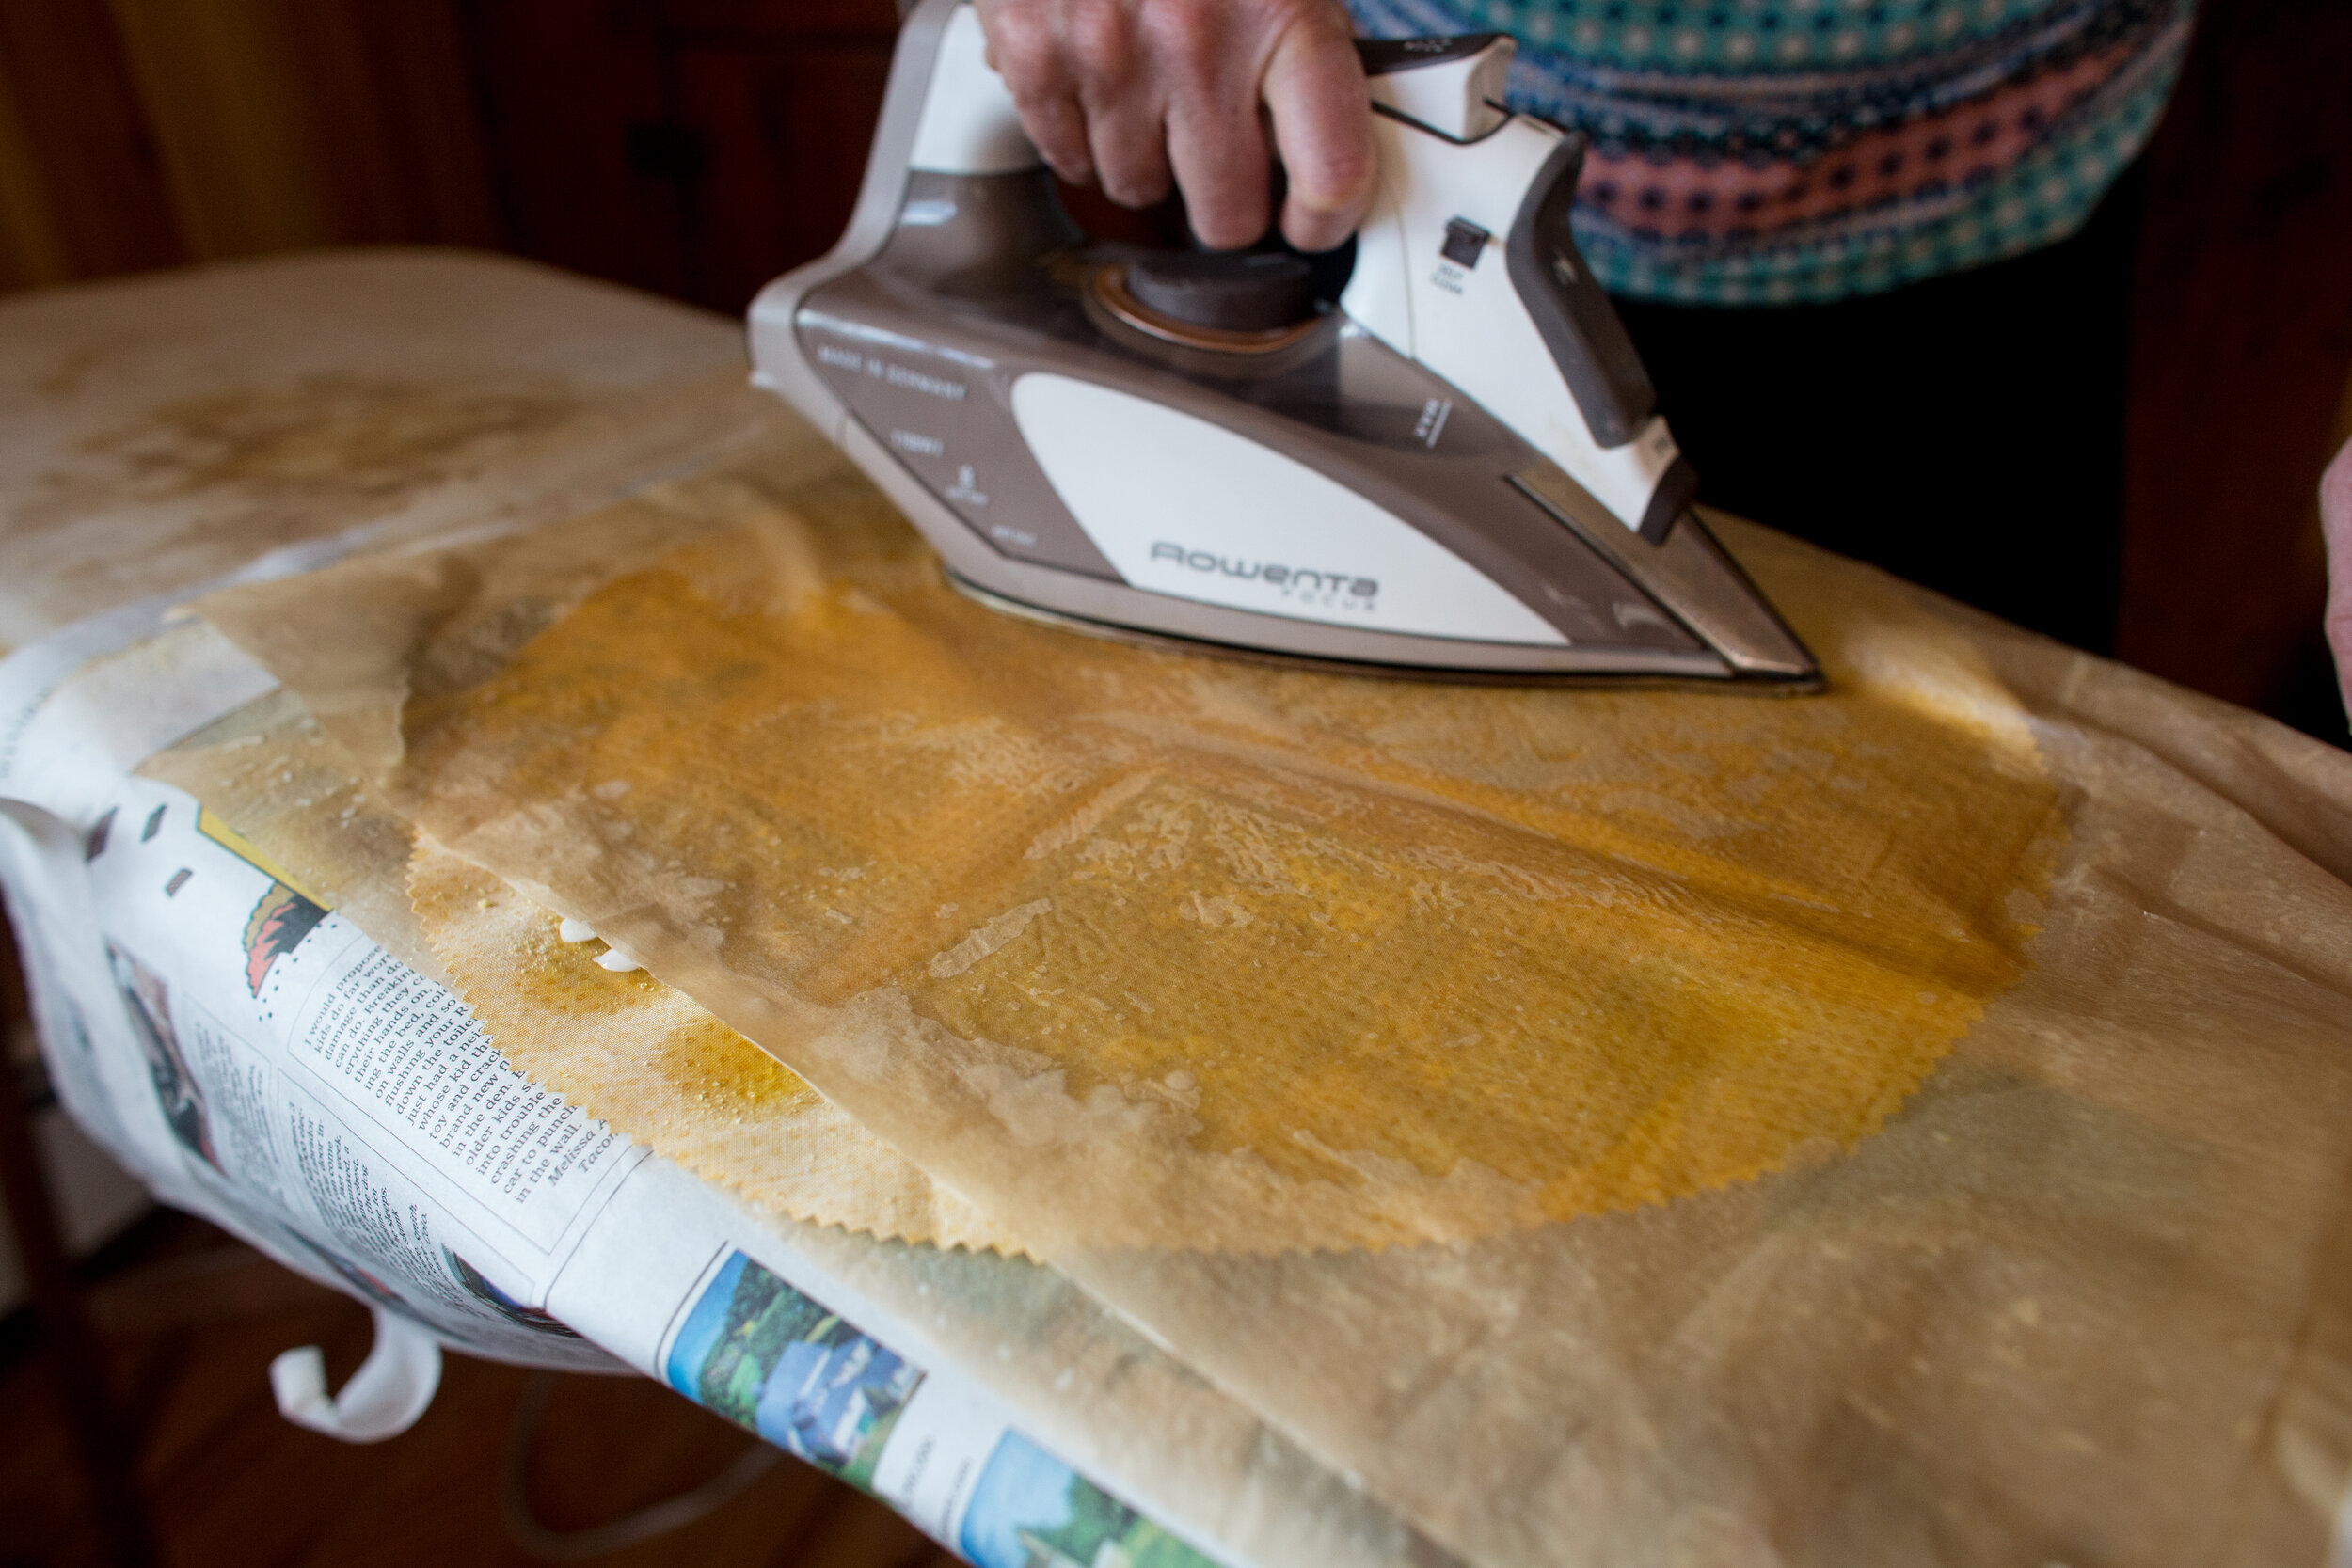 With a hot iron, press the fabric between the layers of parchment